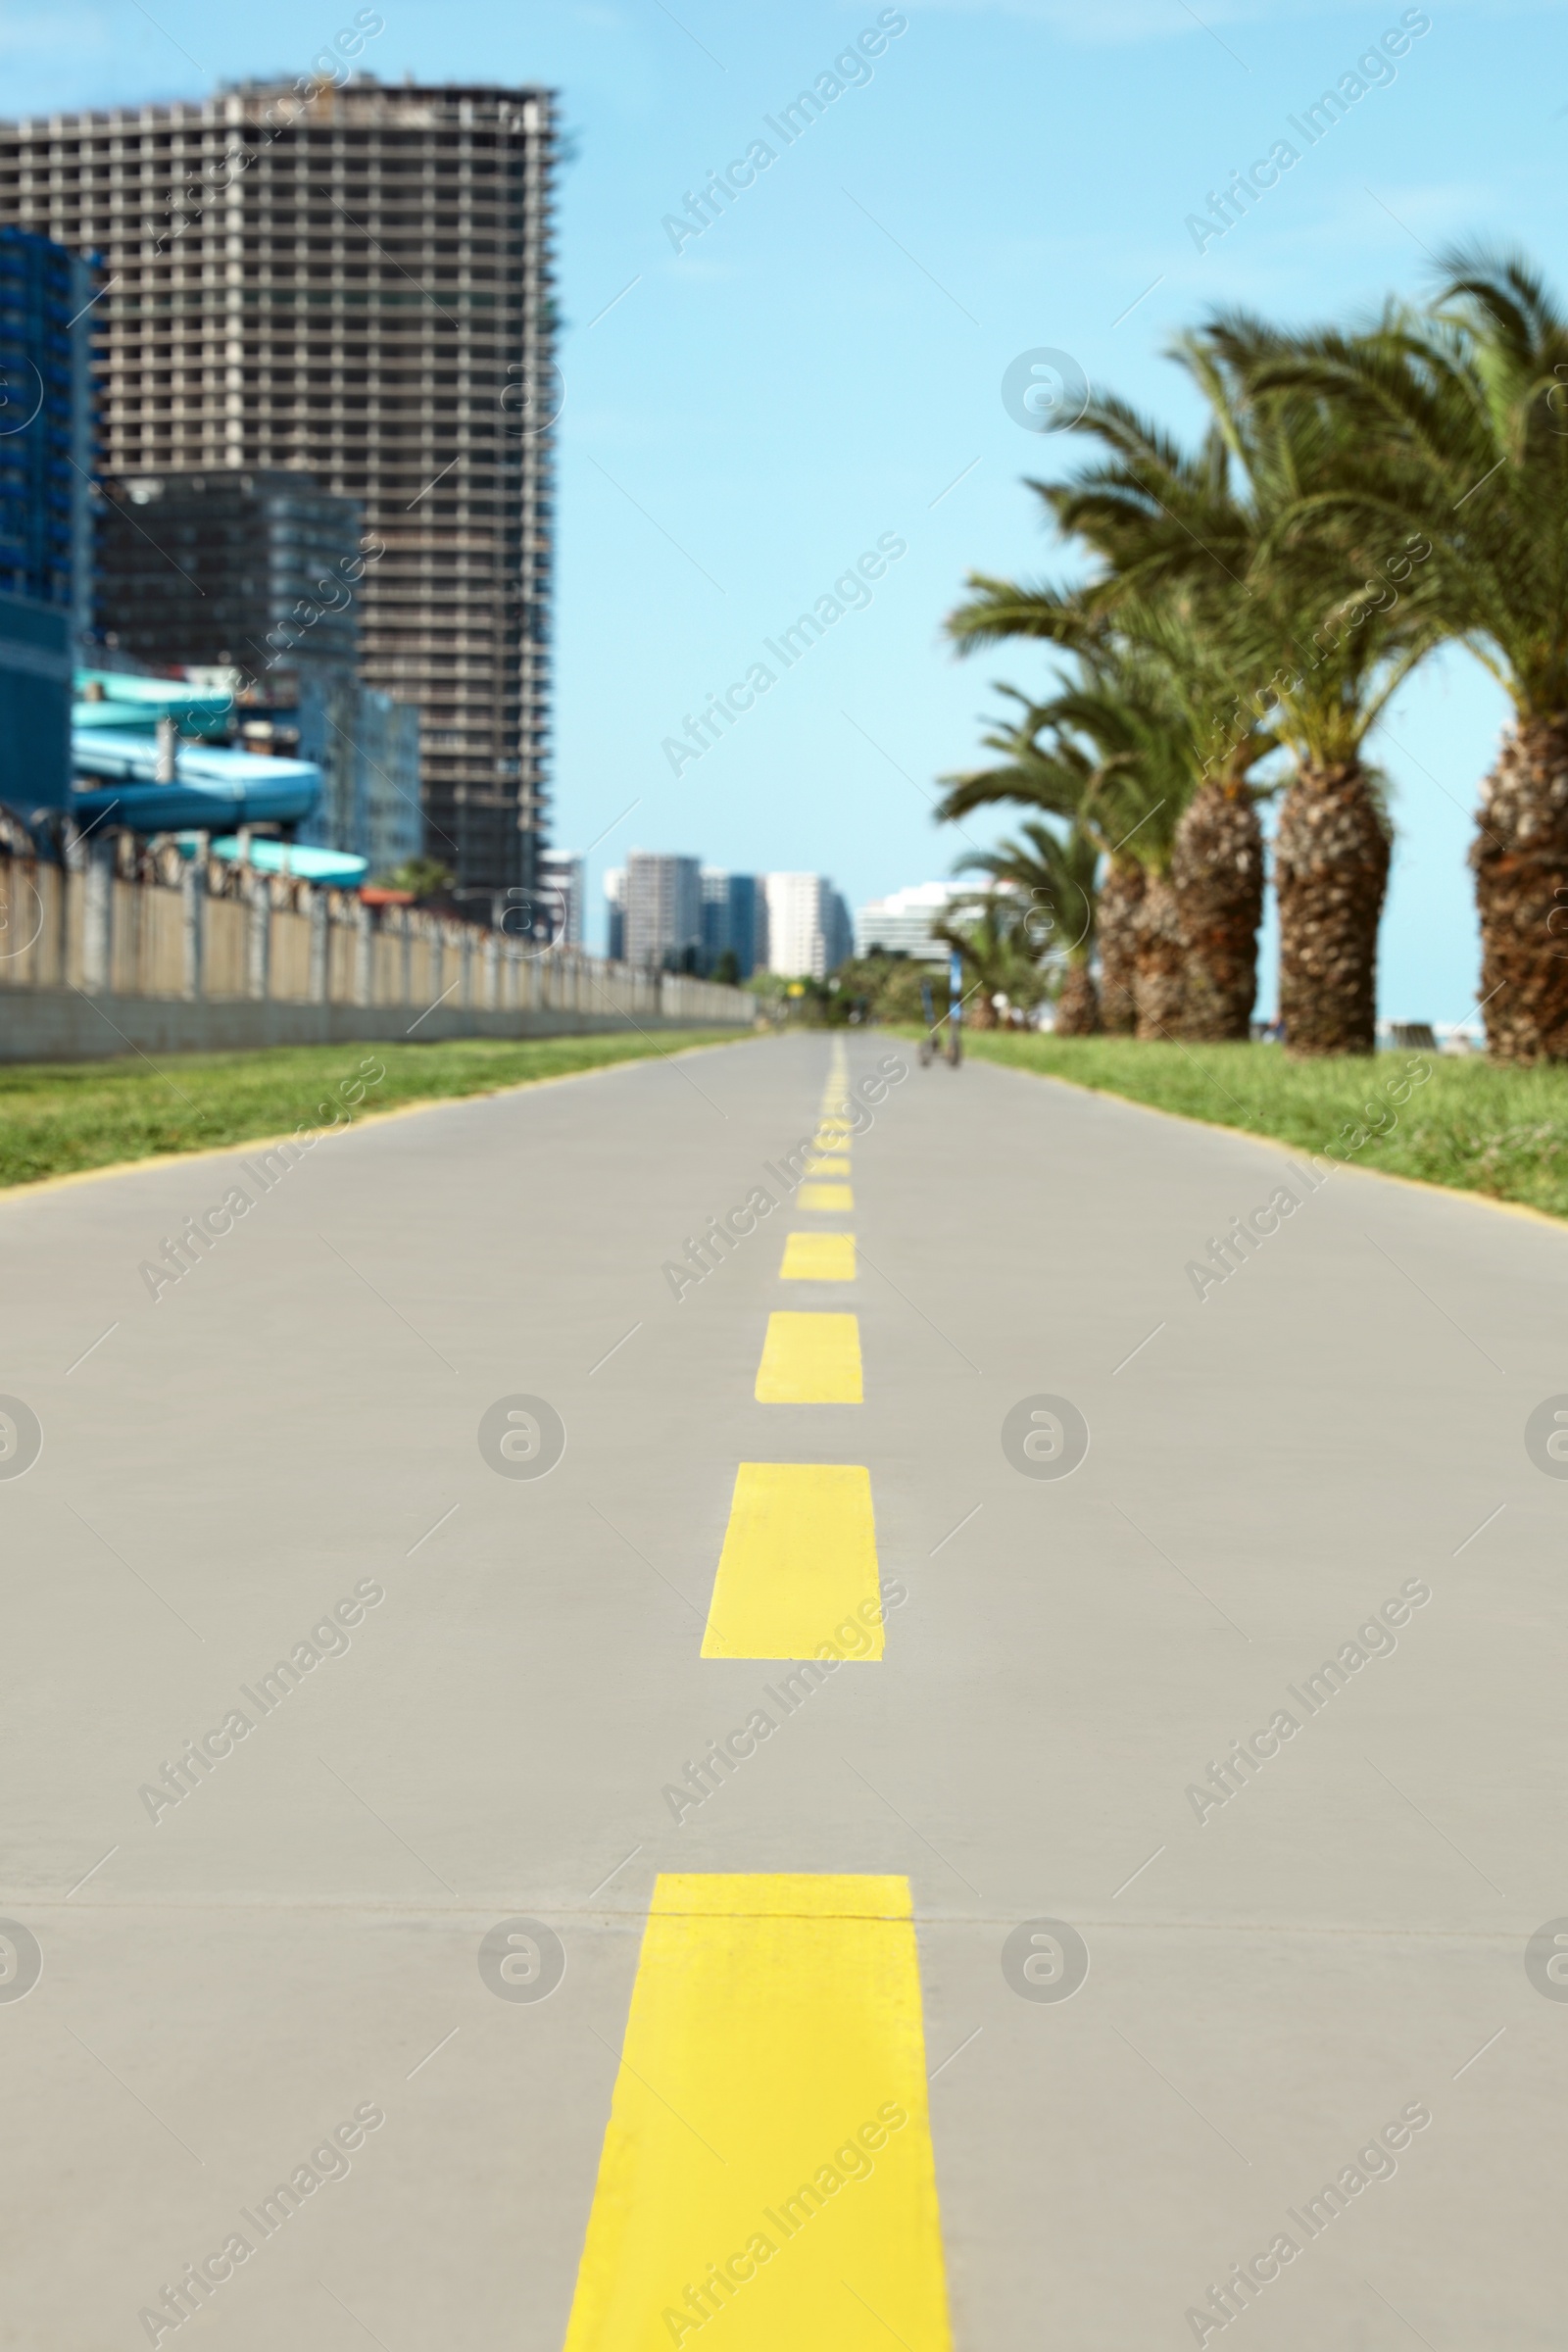 Photo of Bicycle lane with yellow dividing lines painted on asphalt, closeup